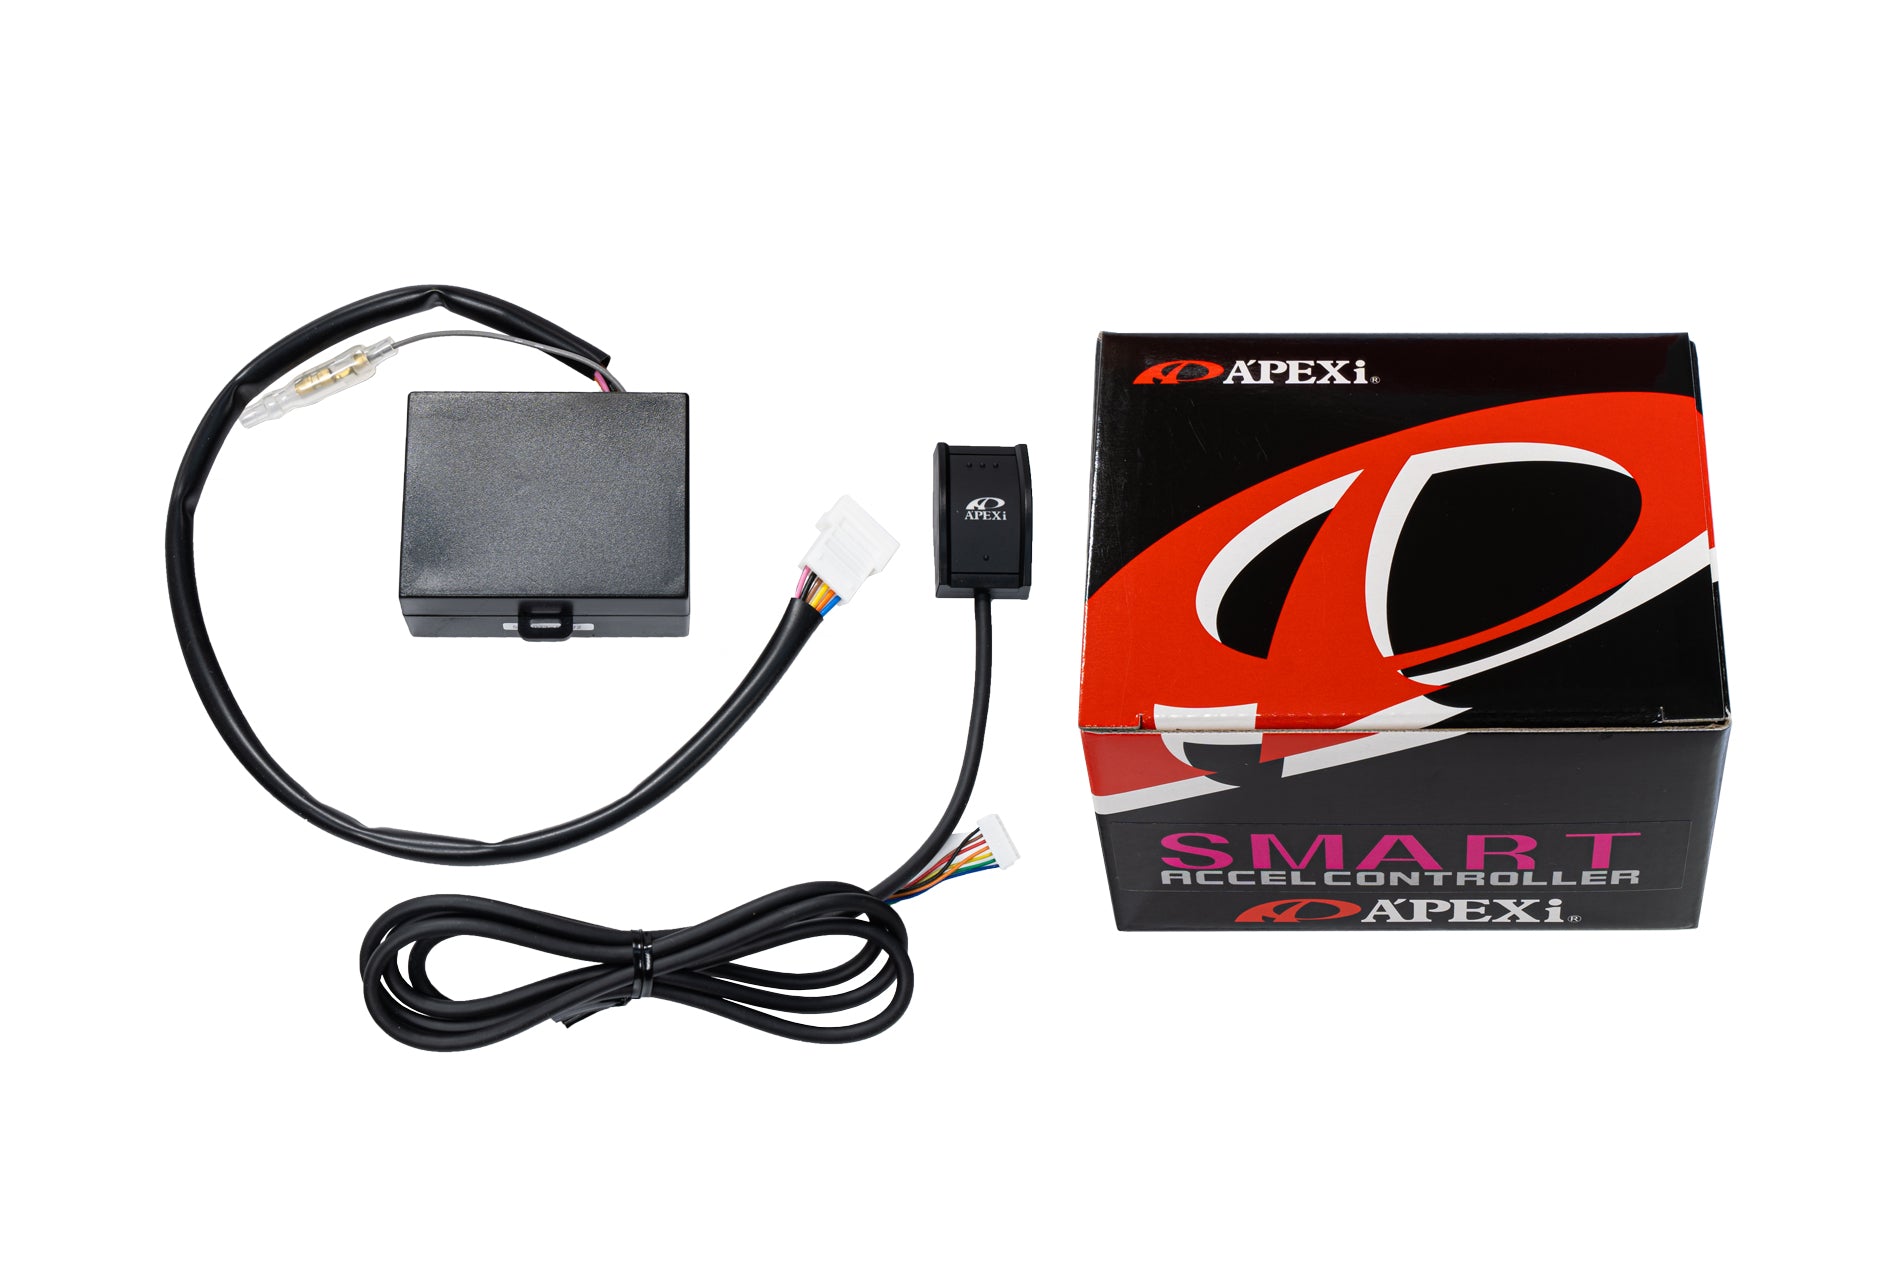 APEXi - Electronics, SMART Accel Controller with Harness